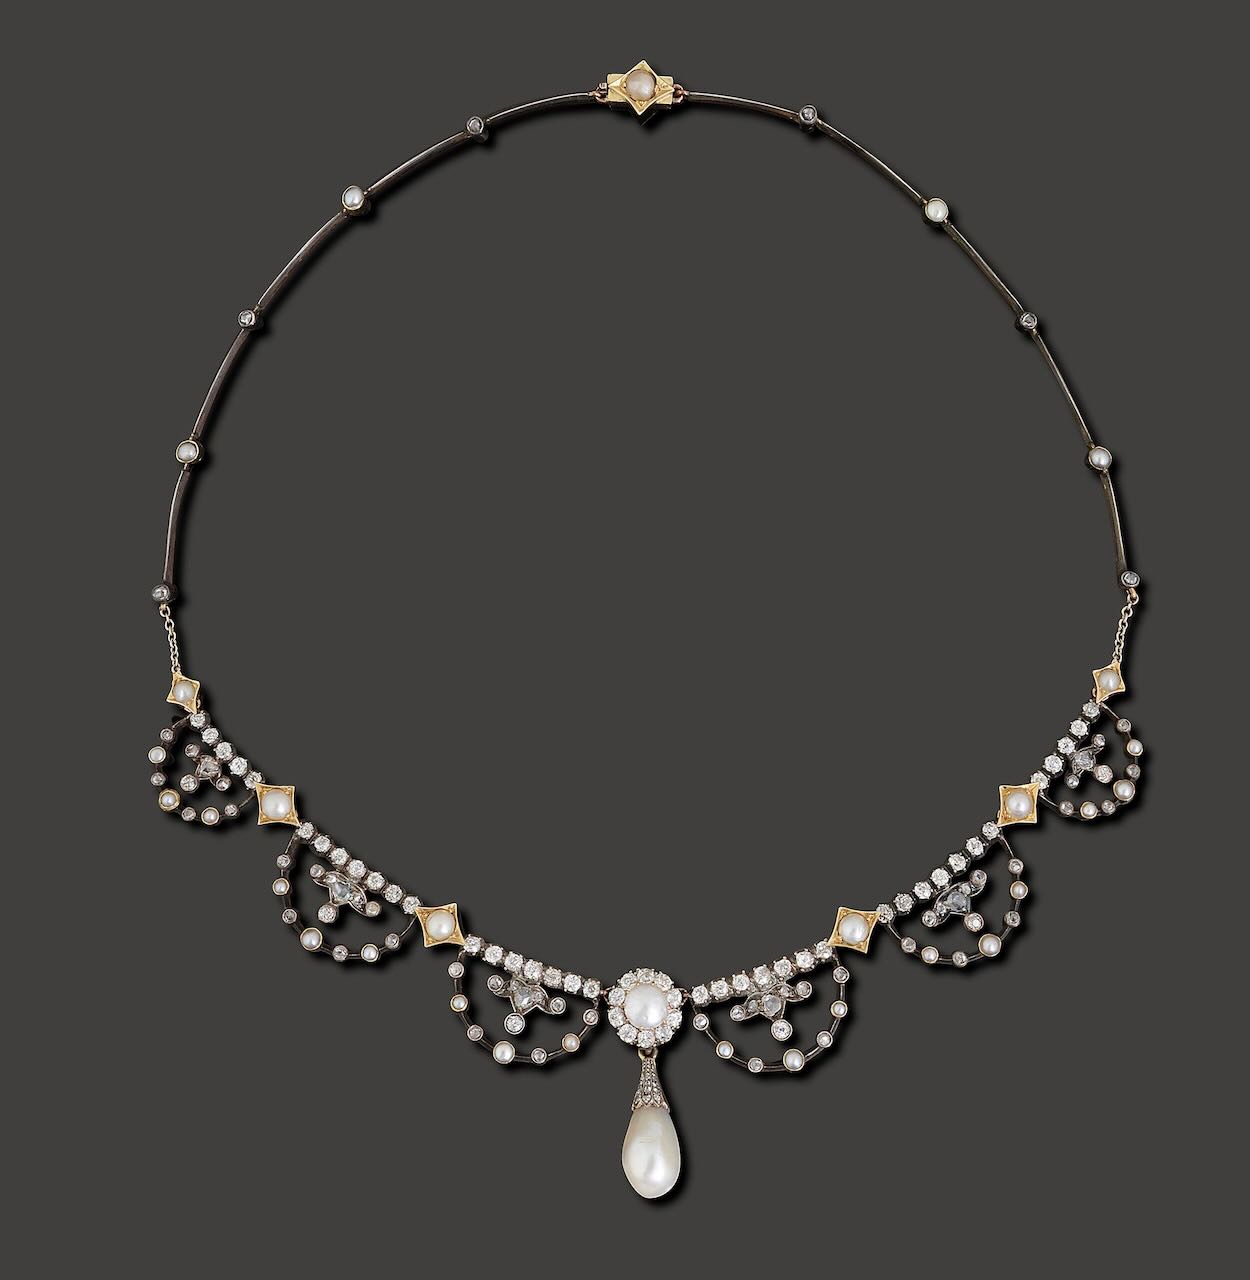 A mid/late 19th century pearl and diamond-set necklace - Image 2 of 10